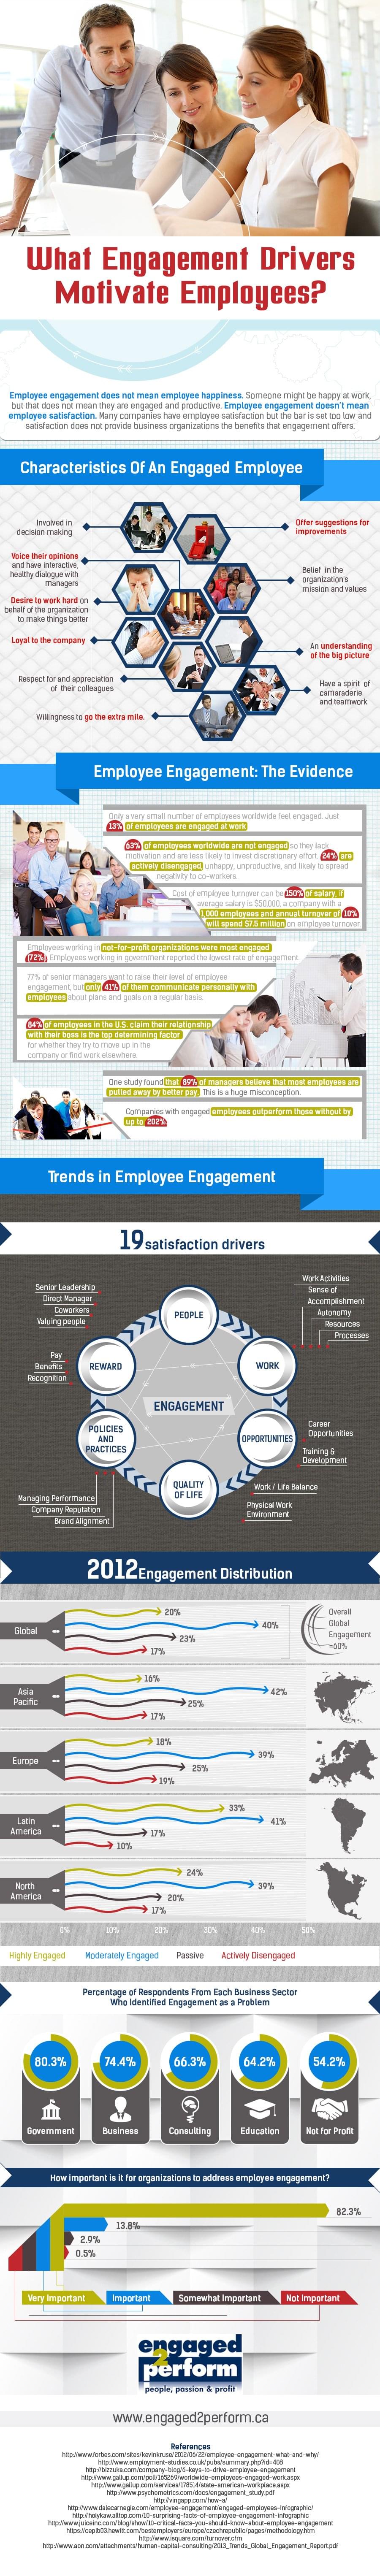 engagement drivers